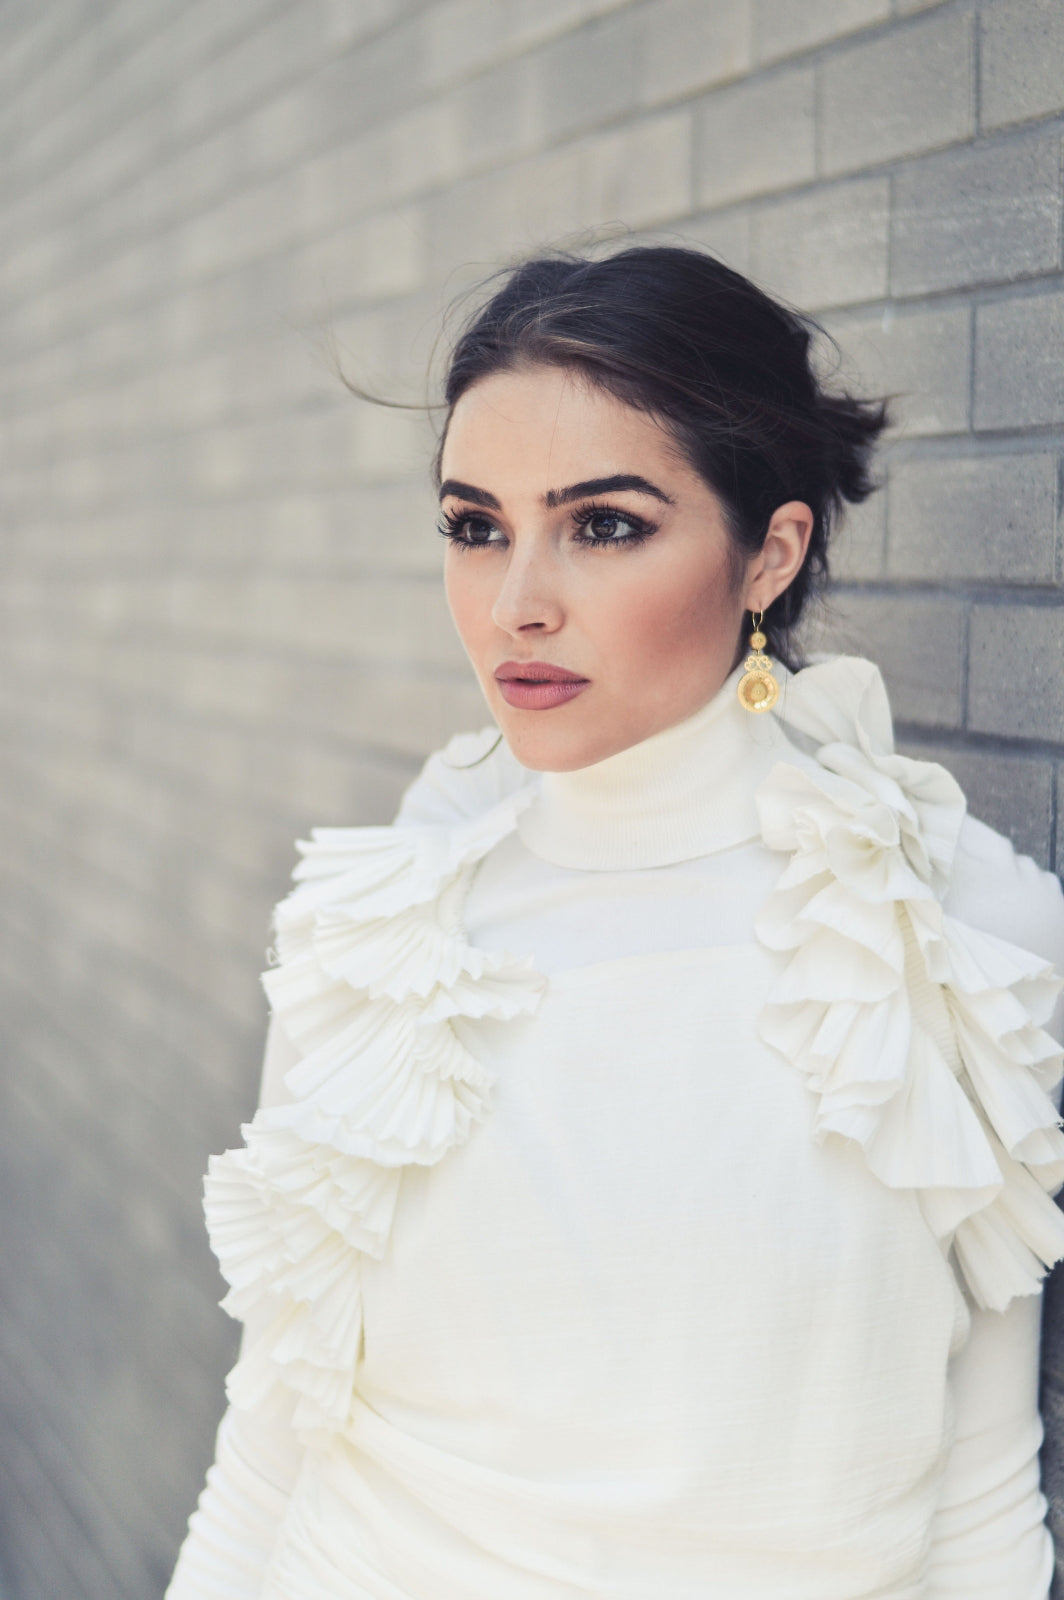 Hairstyle Trend, Review 2016, 2017, 2018: ghd Announces Olivia Culpo As Brand Ambassador